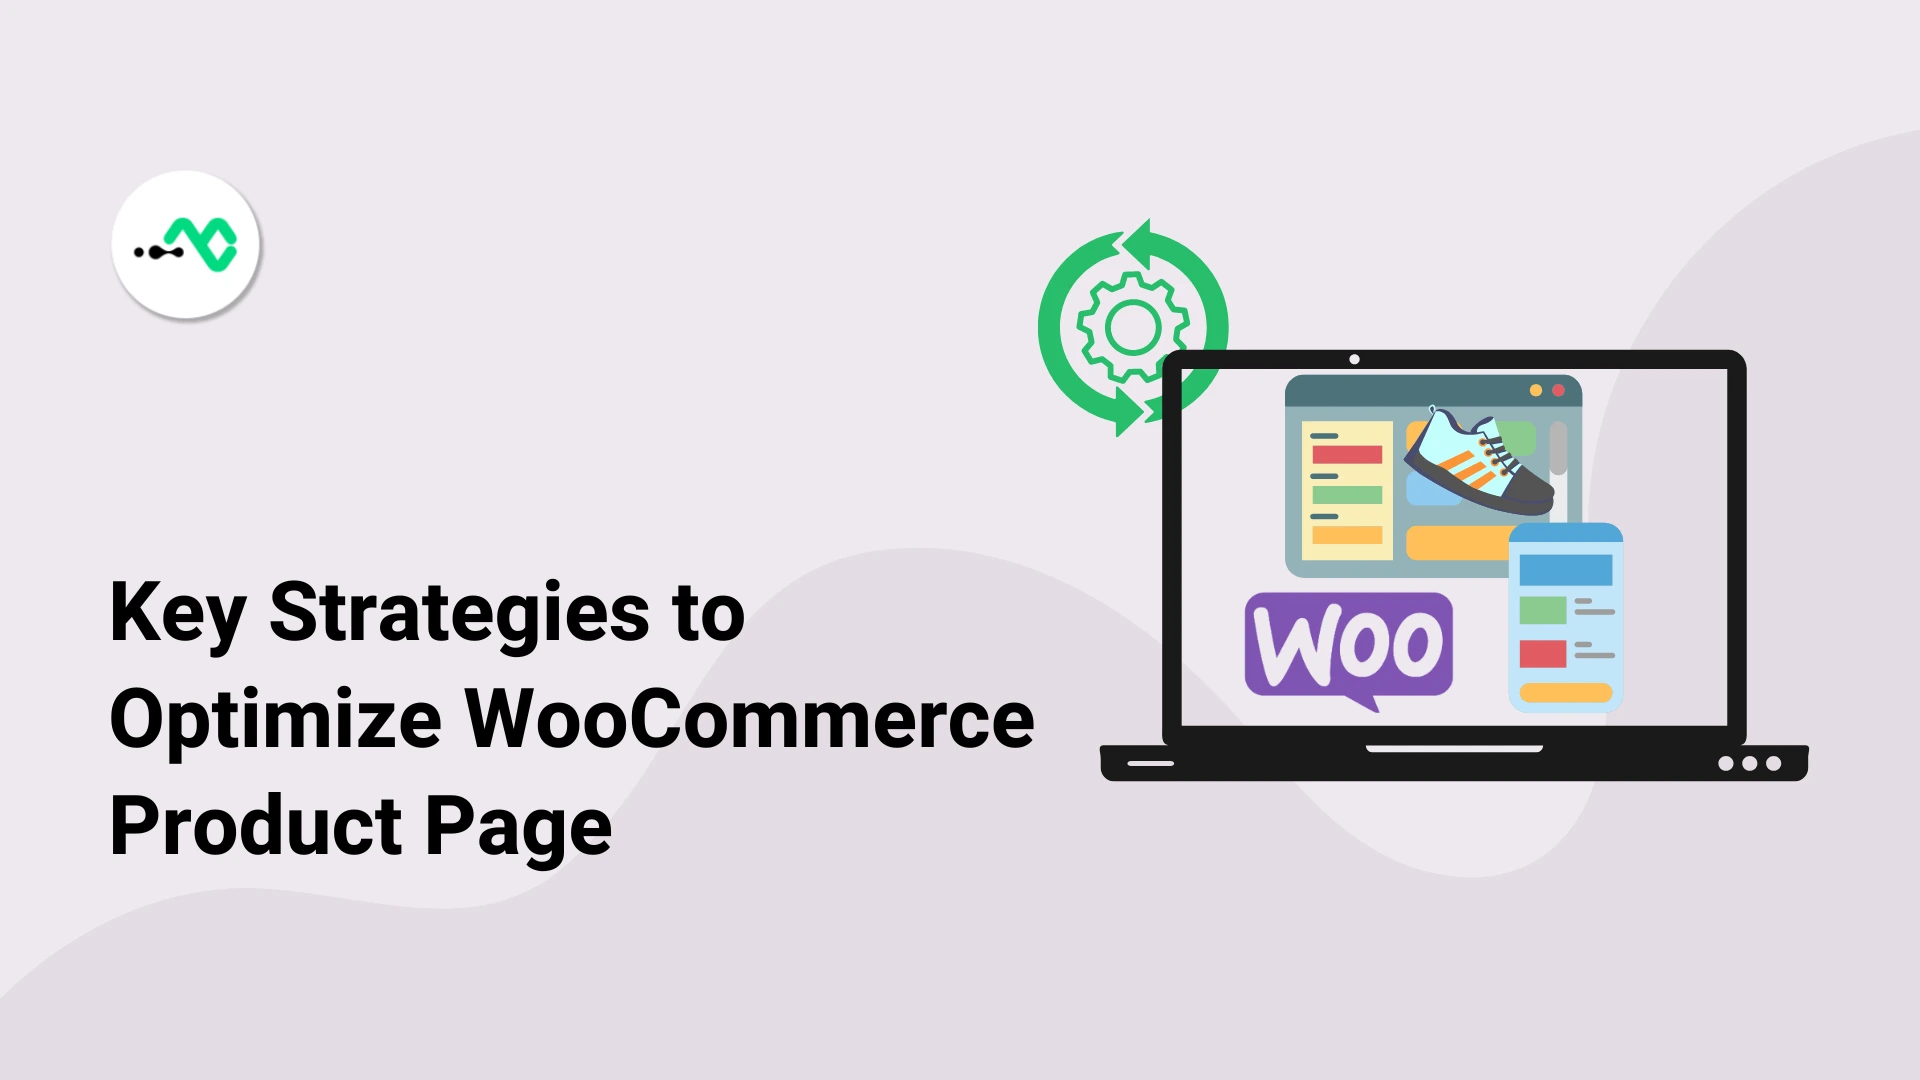 7 Strategies to Optimize WooCommerce Product Pages